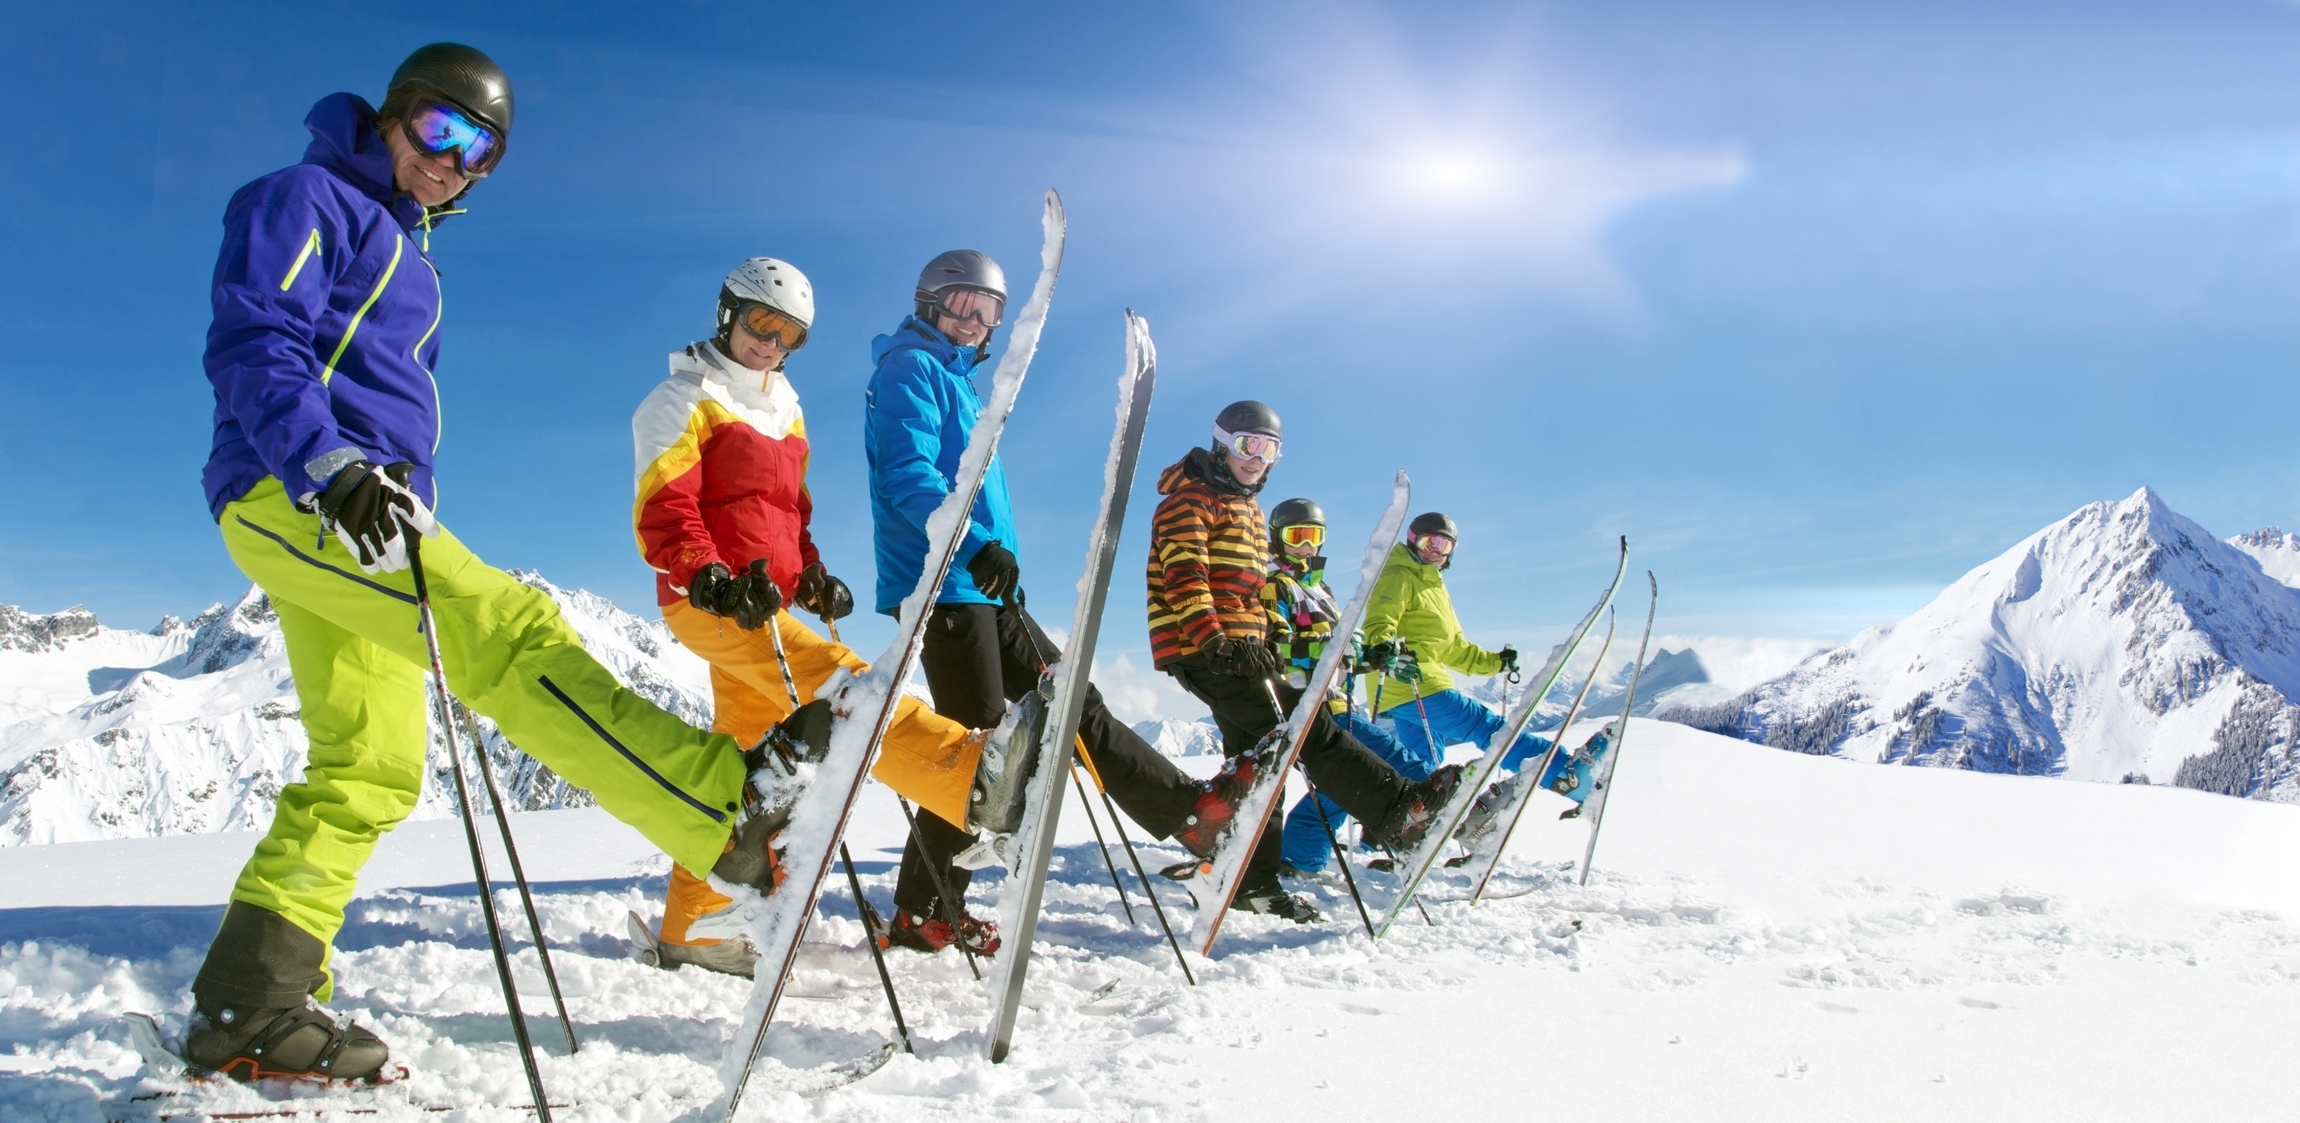 groups of skiers